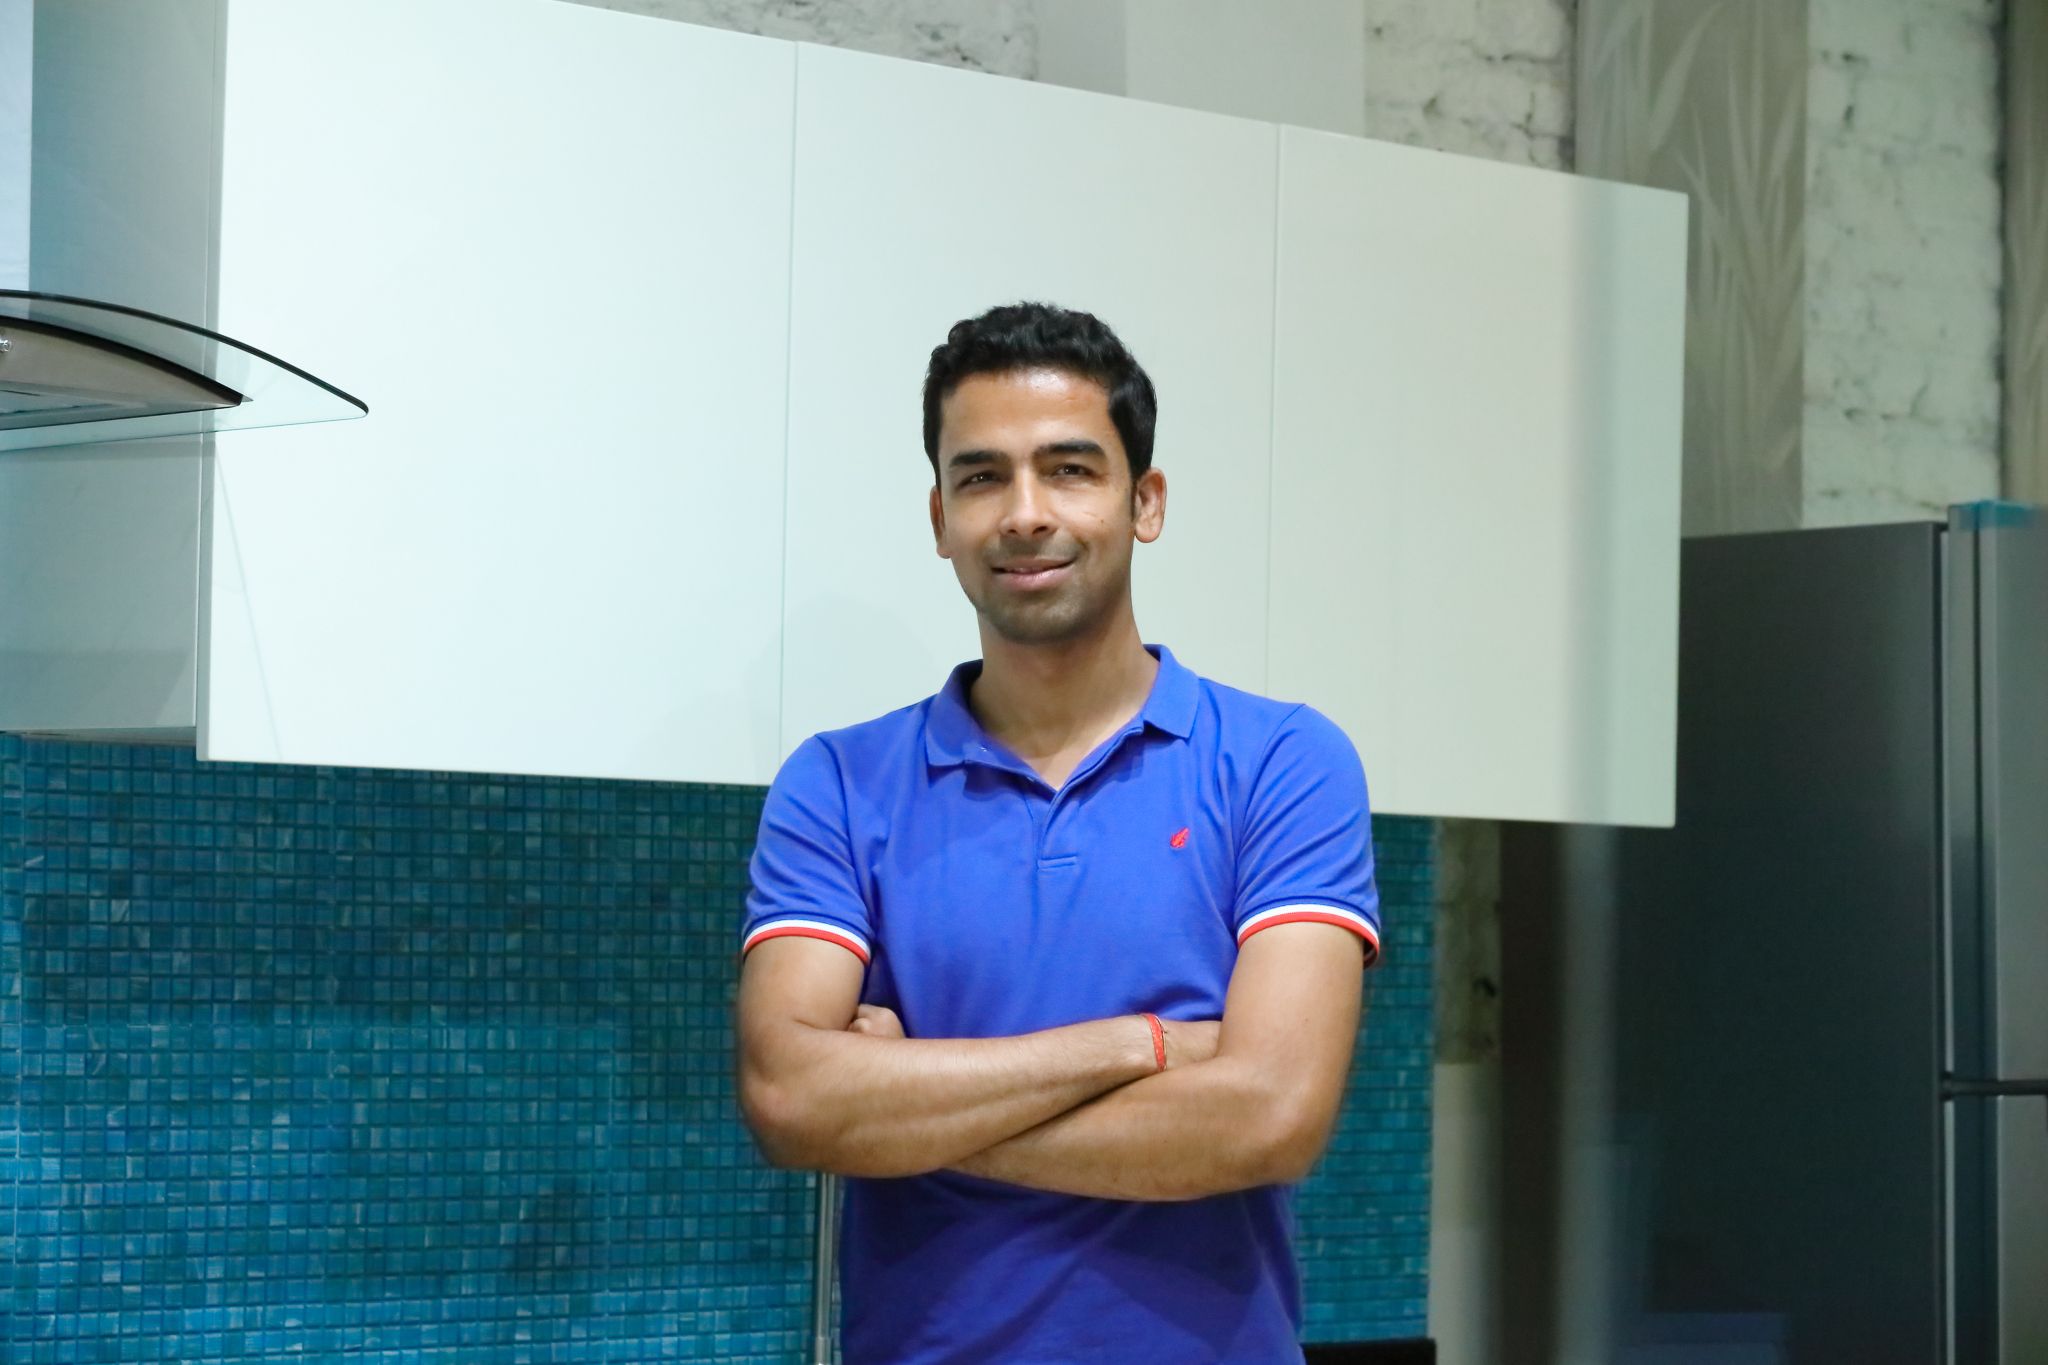 [The F Word] Livspace raises $70 M in Series C funding led by TPG Growth and Goldman Sachs